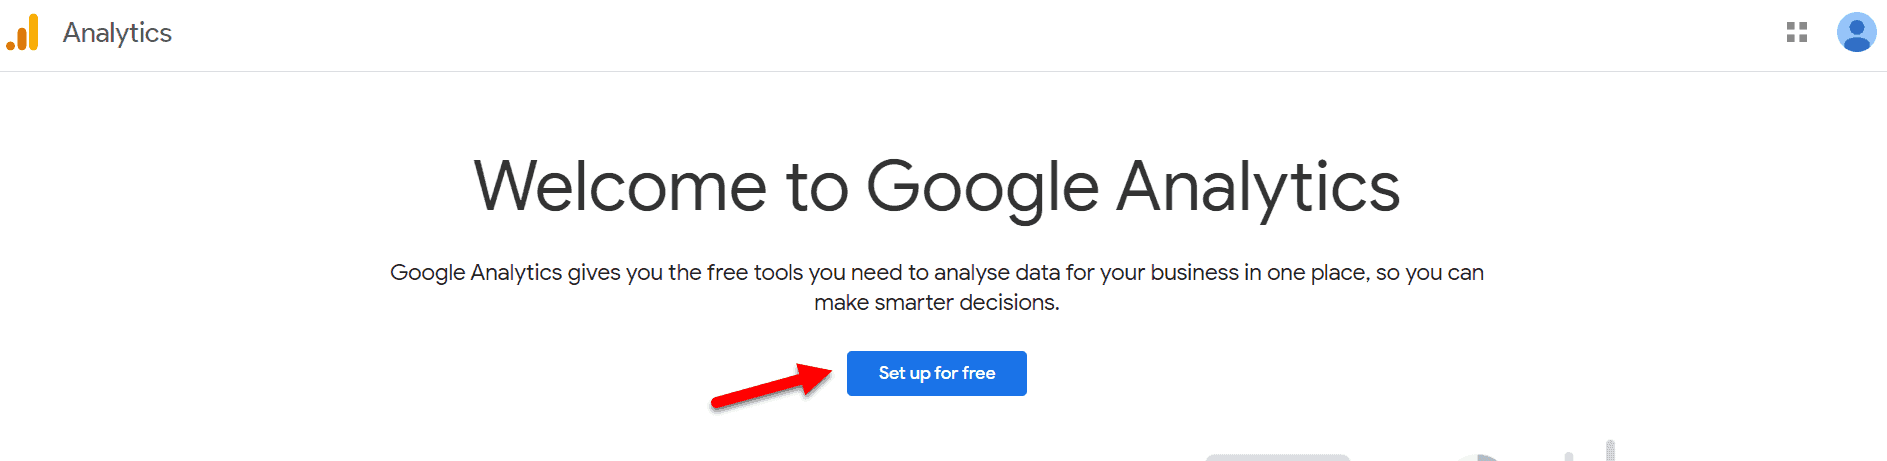 Google Analytics welcome page